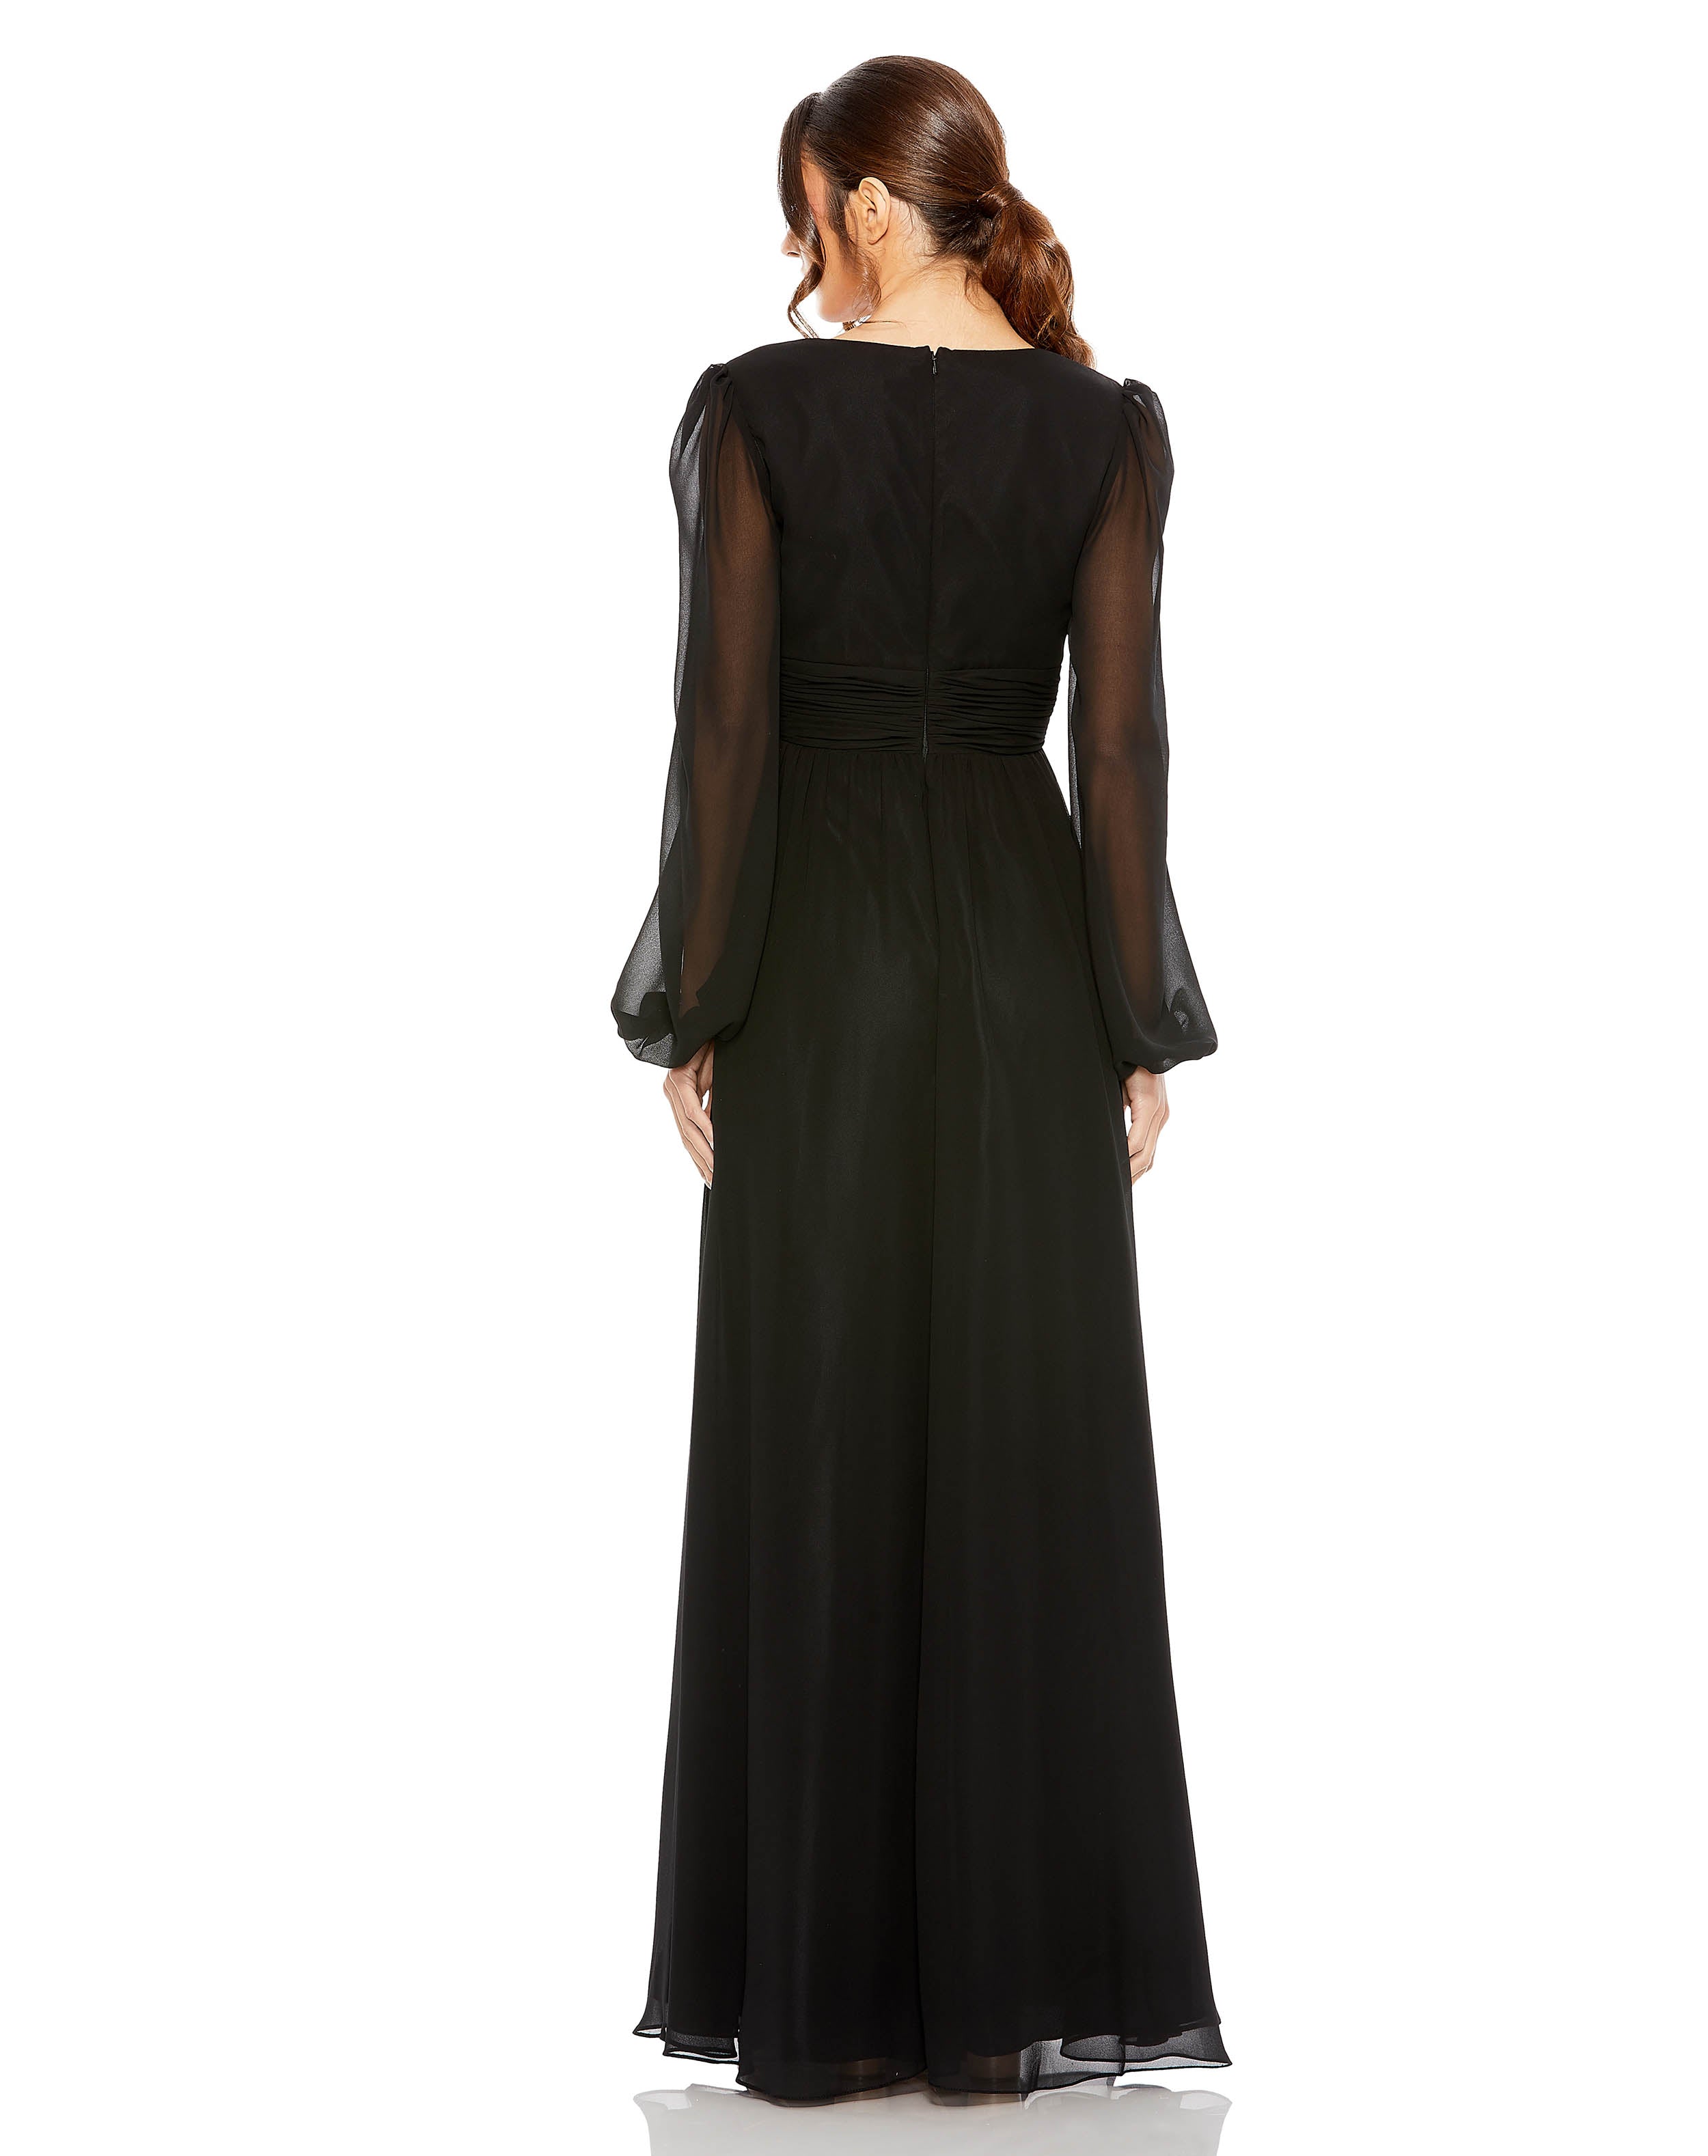 Plunge Neck Lace Up Evening Gown - FINAL SALE